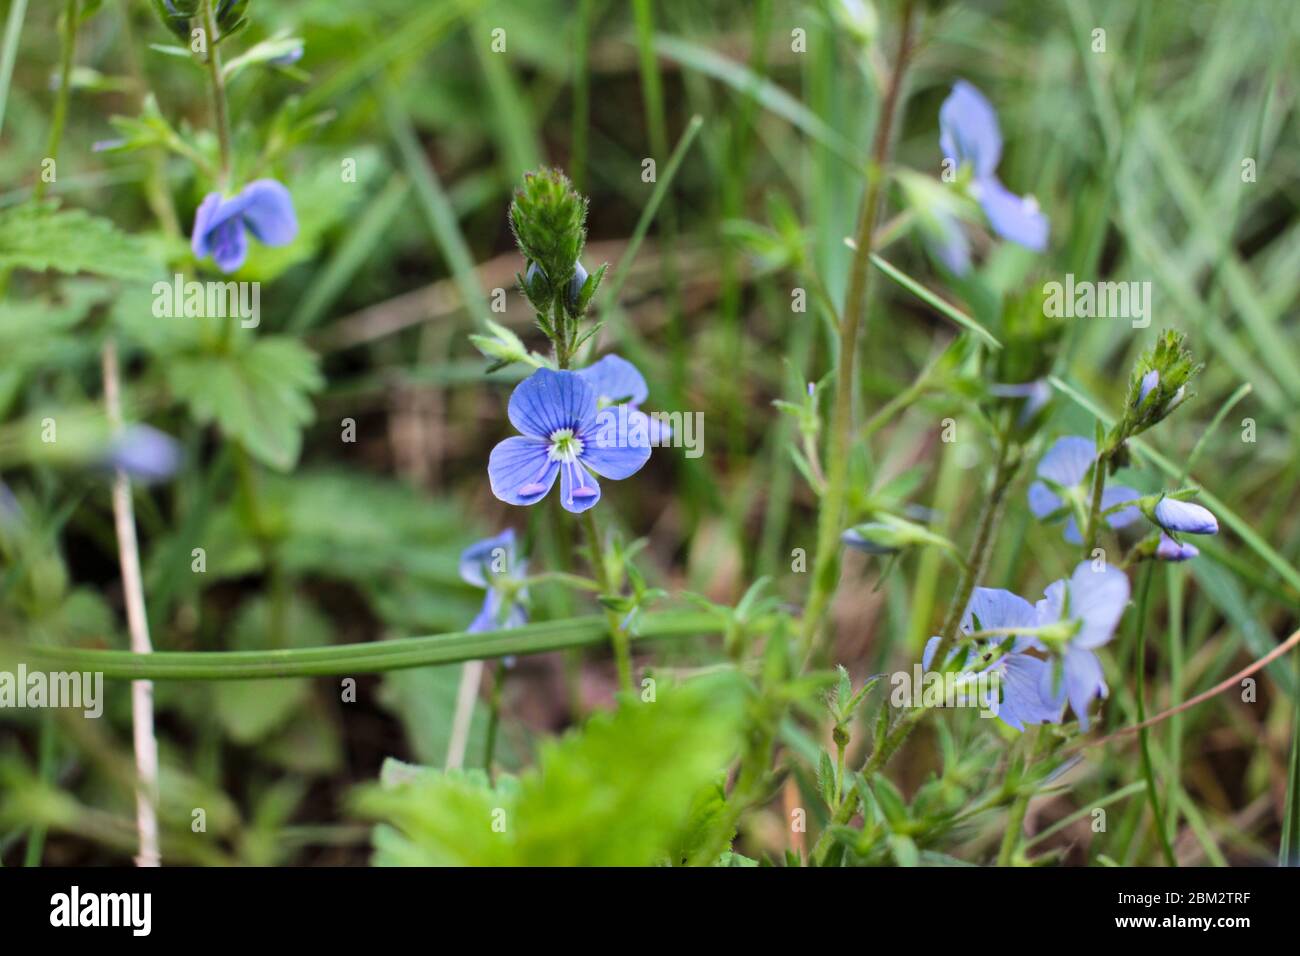 Little blue flowers in the spring forest. Veronica chamaedrys, the germander speedwell, bird's-eye speedwell, or cat's eyes medical plant Stock Photo